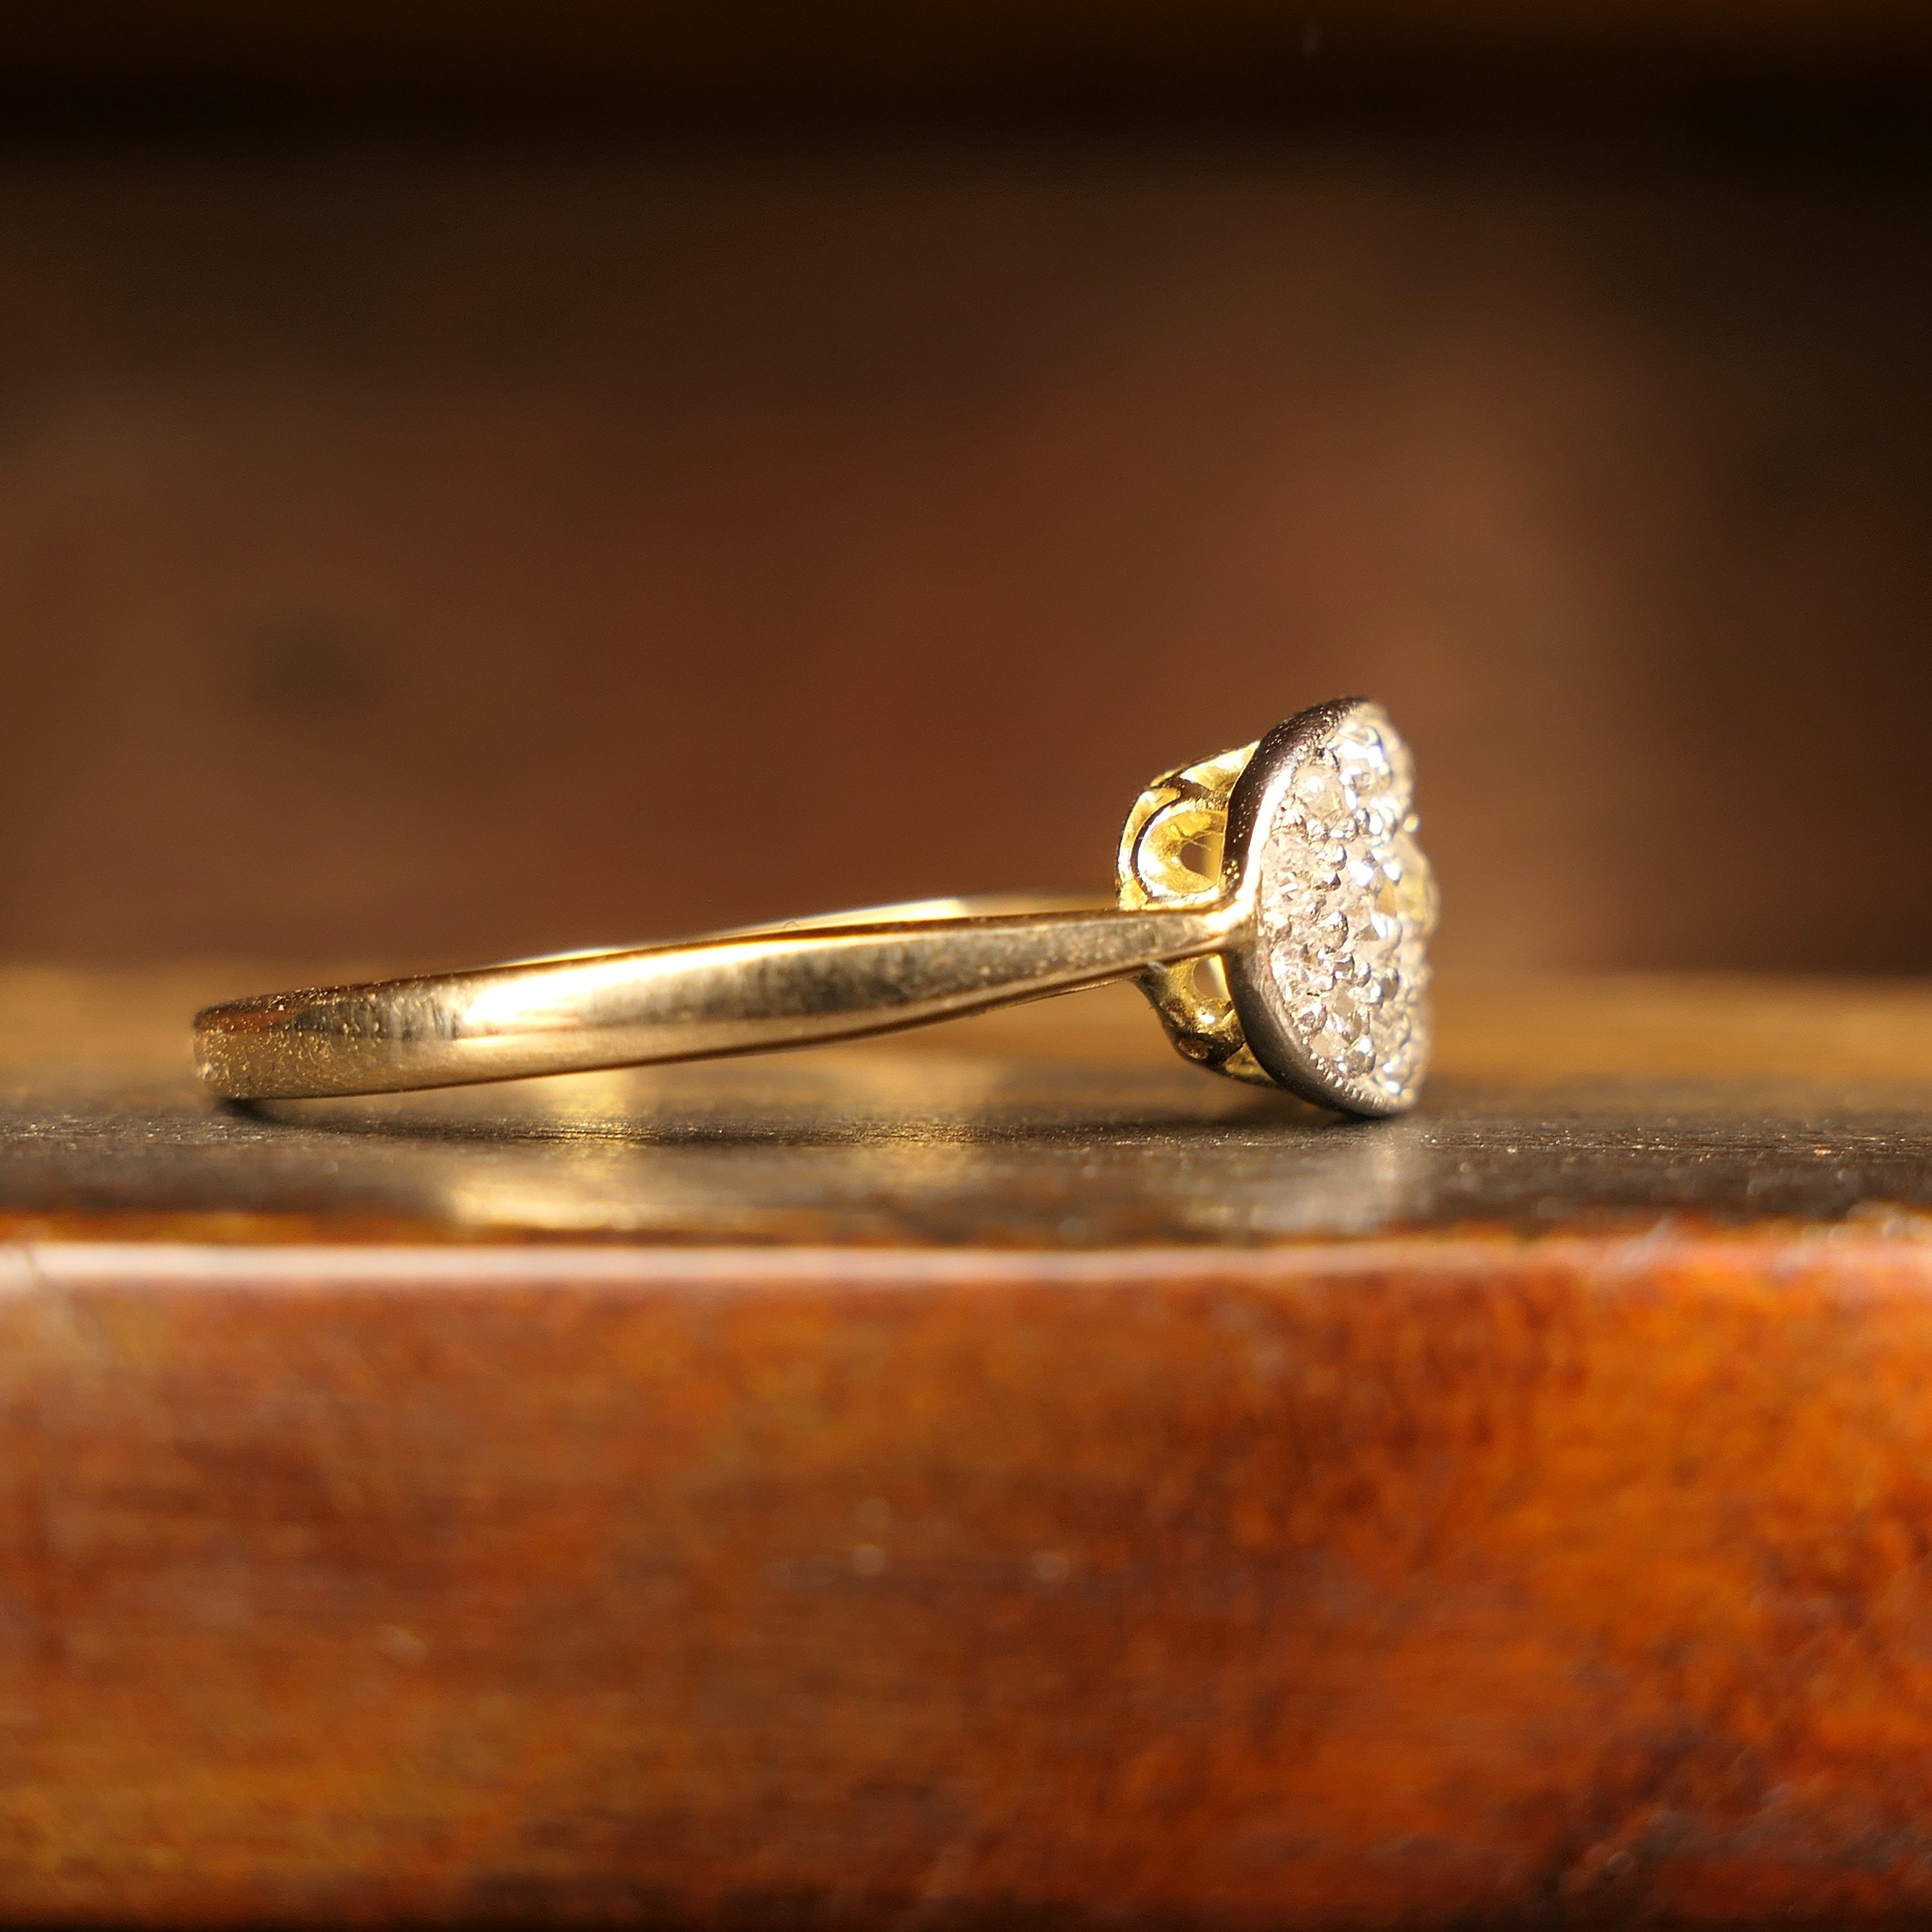 Early 20th century, 18ct gold & platinum, old cut diamond cluster ring, c1910